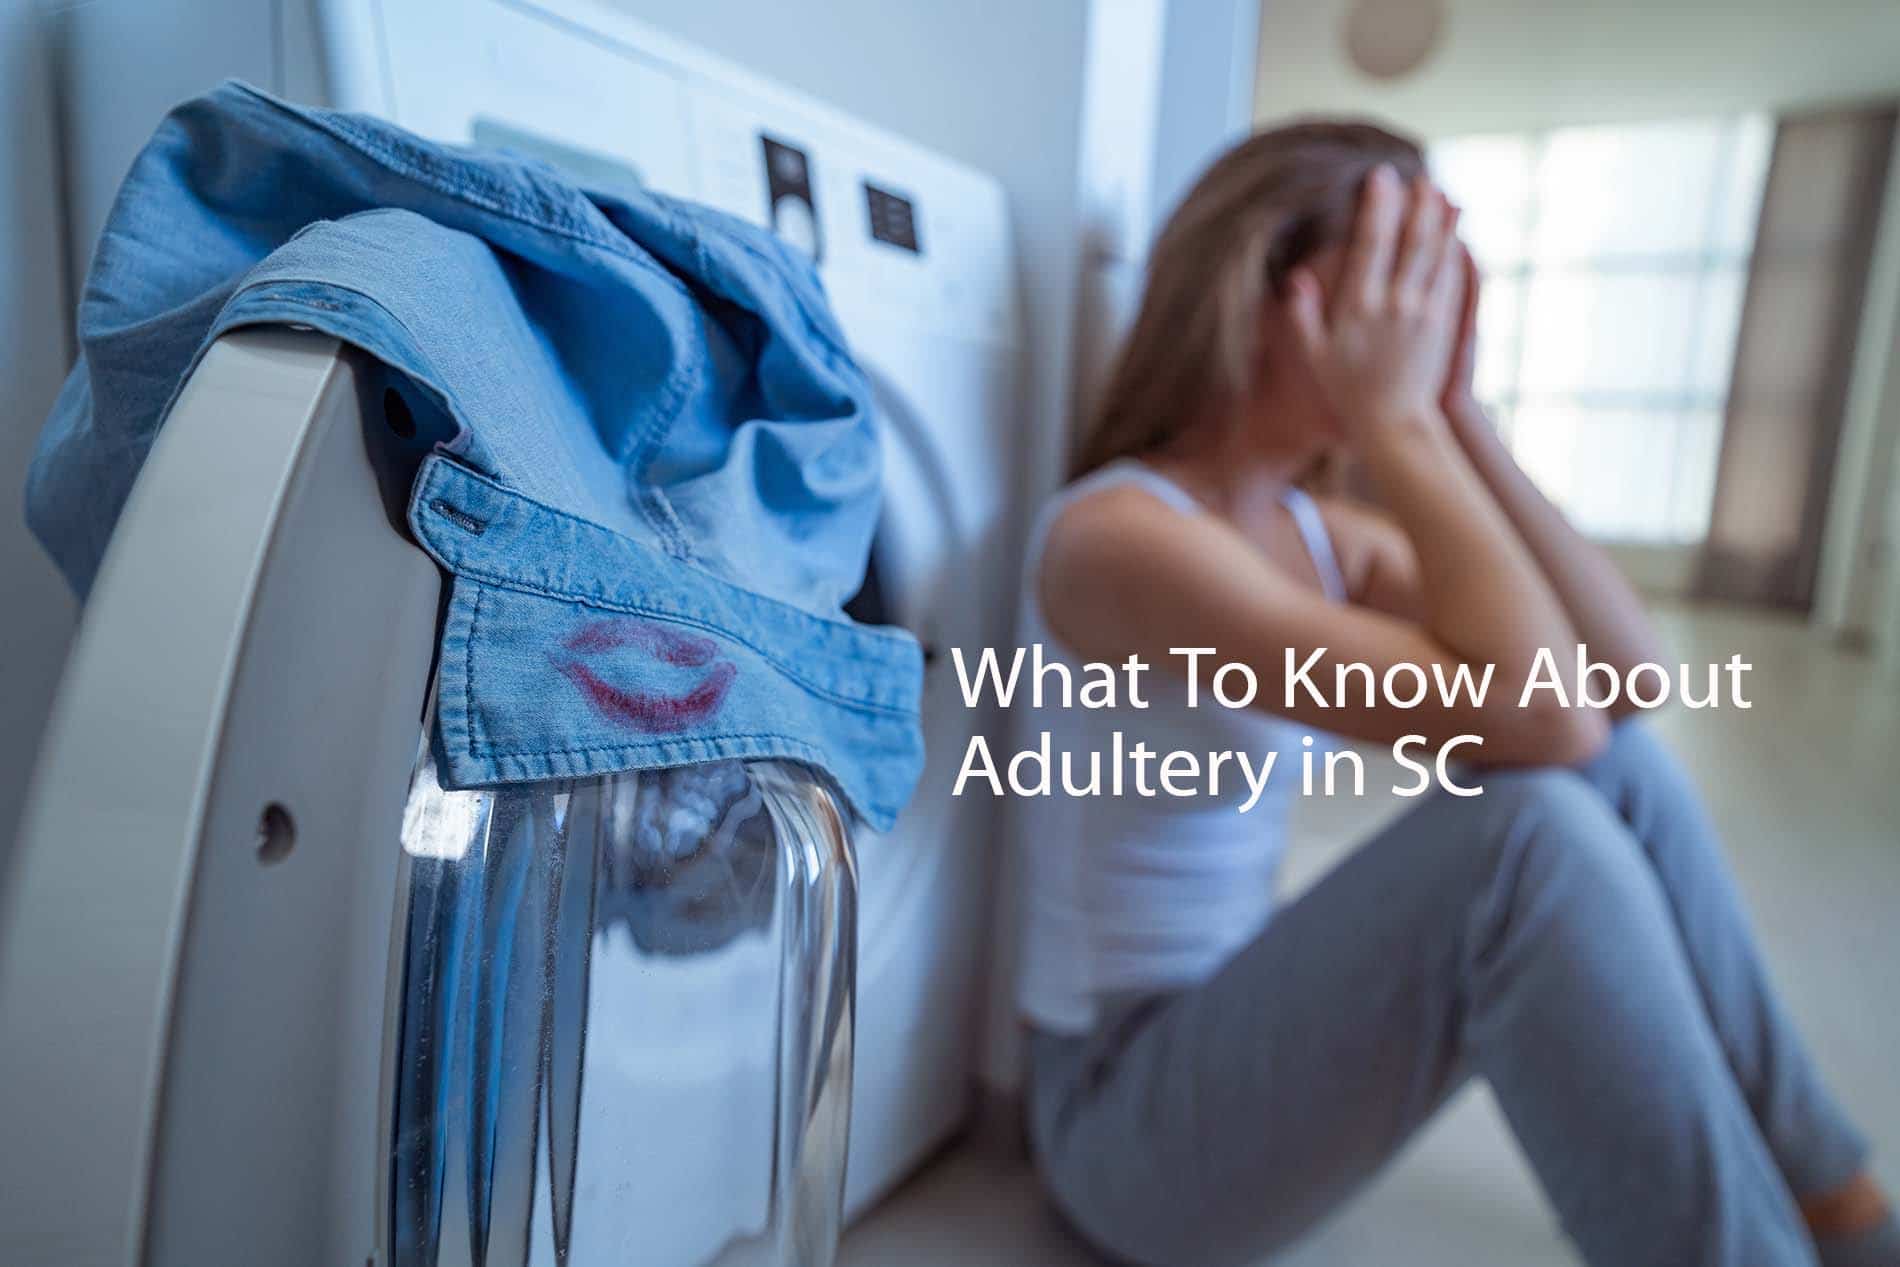 Woman sitting down with her head in her hands in a laundry mat after finding lipstick on the collar of her husband's shirt with the words "What To Know About Adultery in SC".